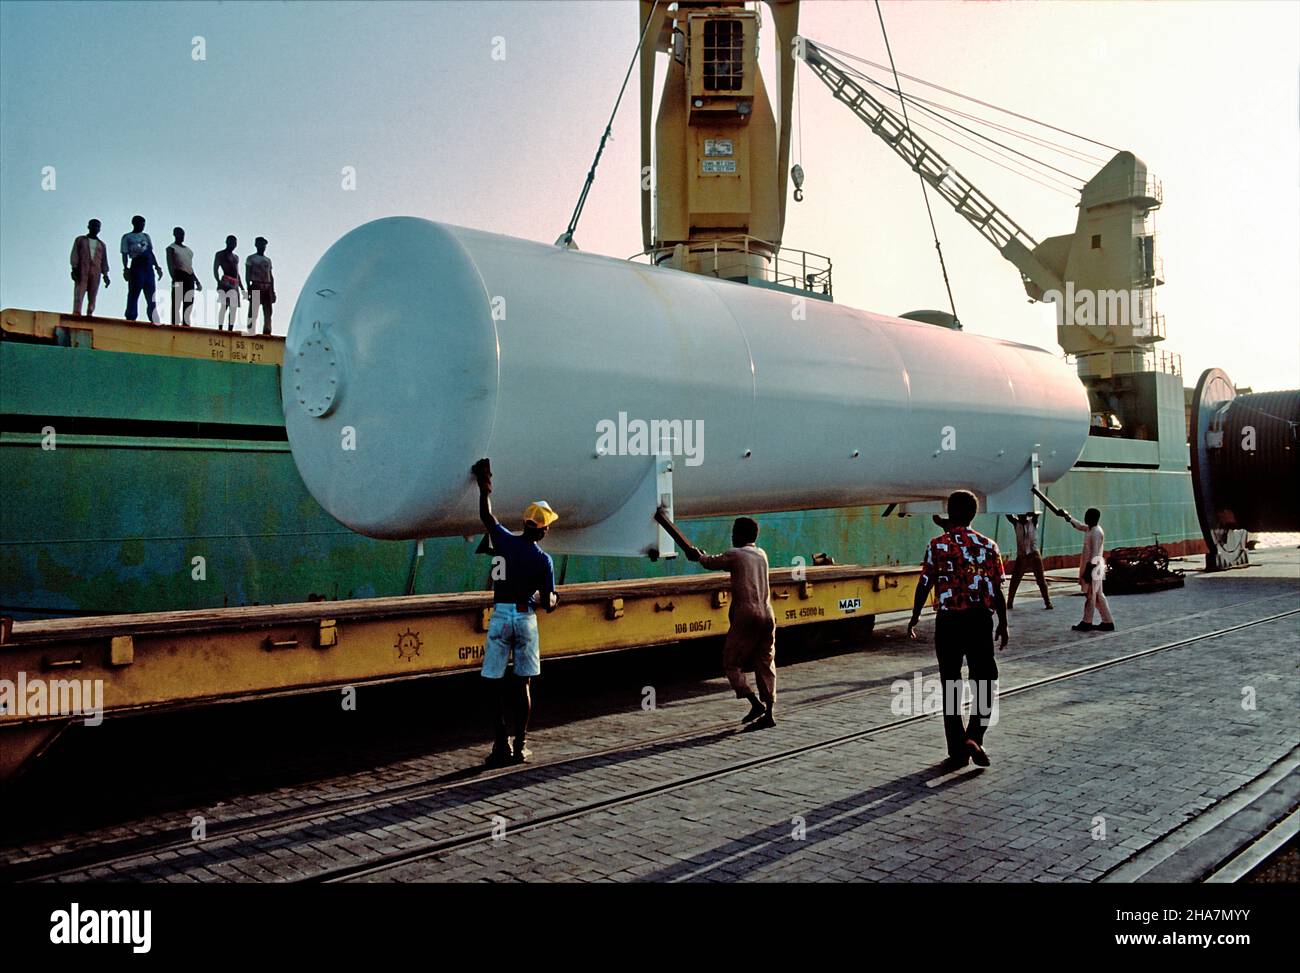 Heavy cargo, a drilling equipment, being transshipped on a mafi trailer in the Port of Tema, Ghana. Stock Photo